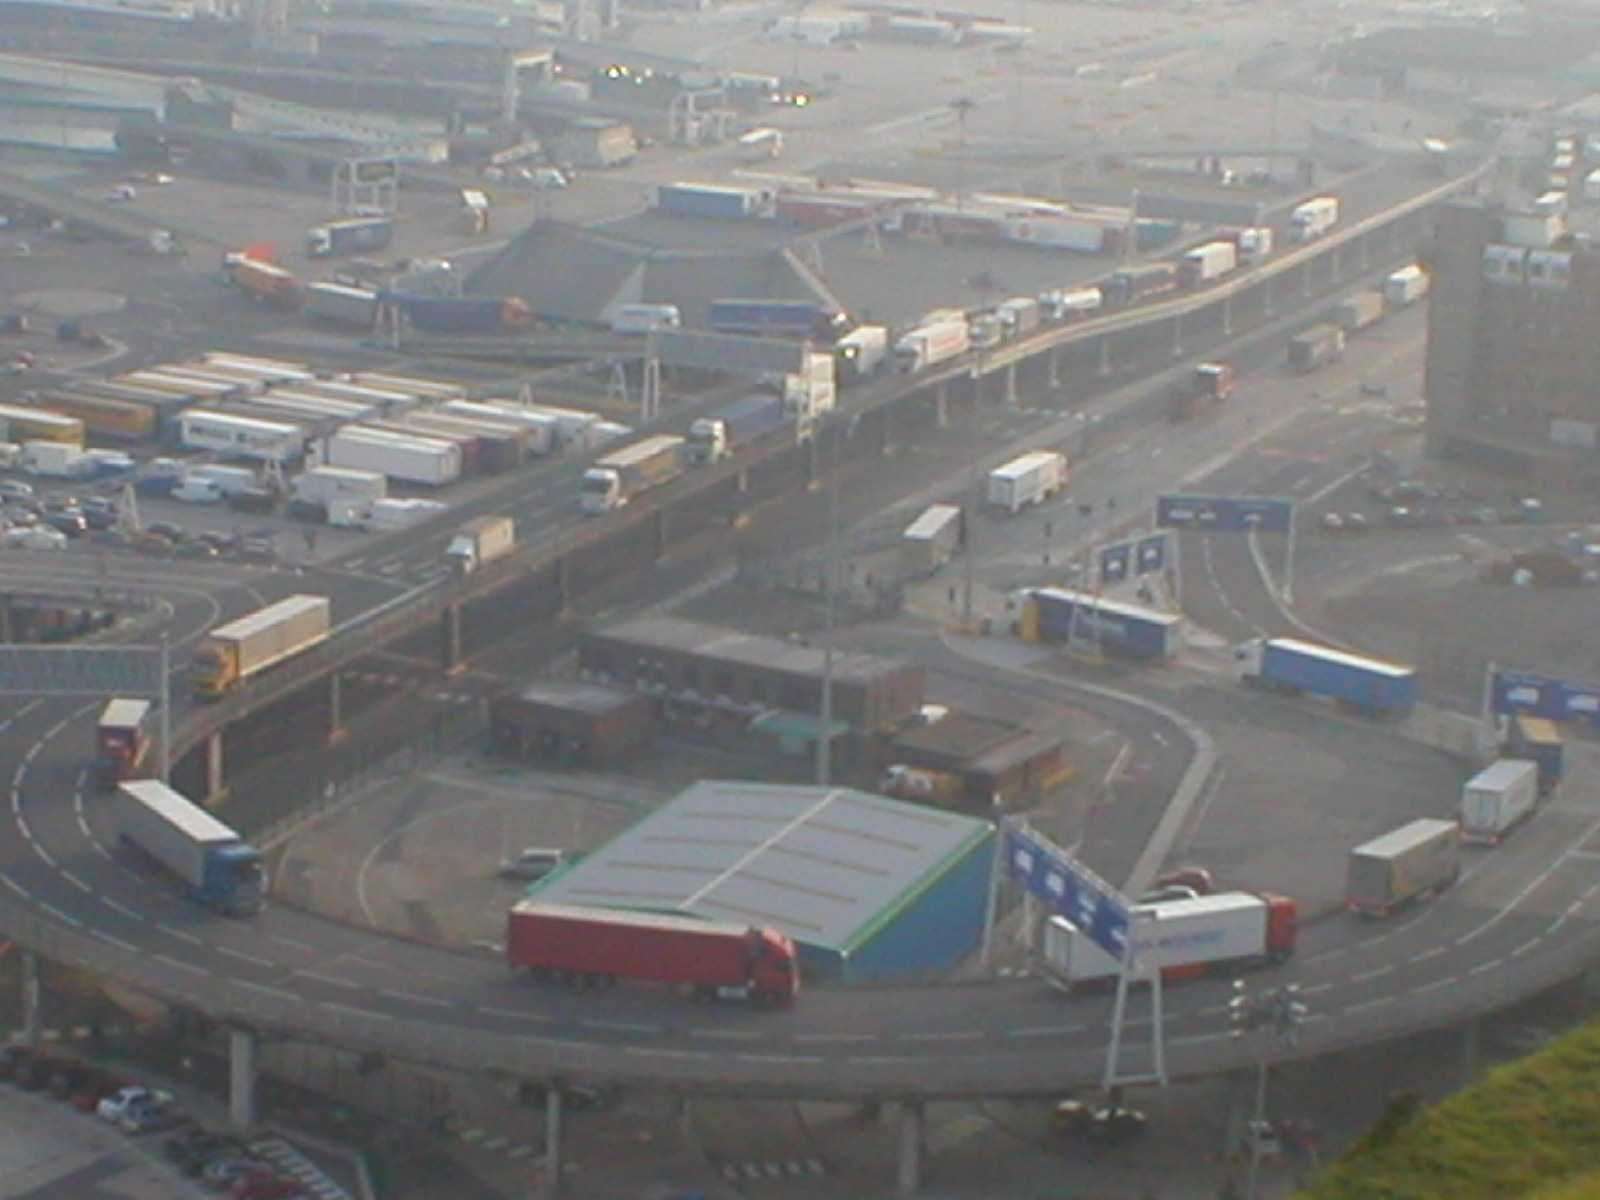 Eastern Docks, Dover where the 58 bodies were found dead in 2000